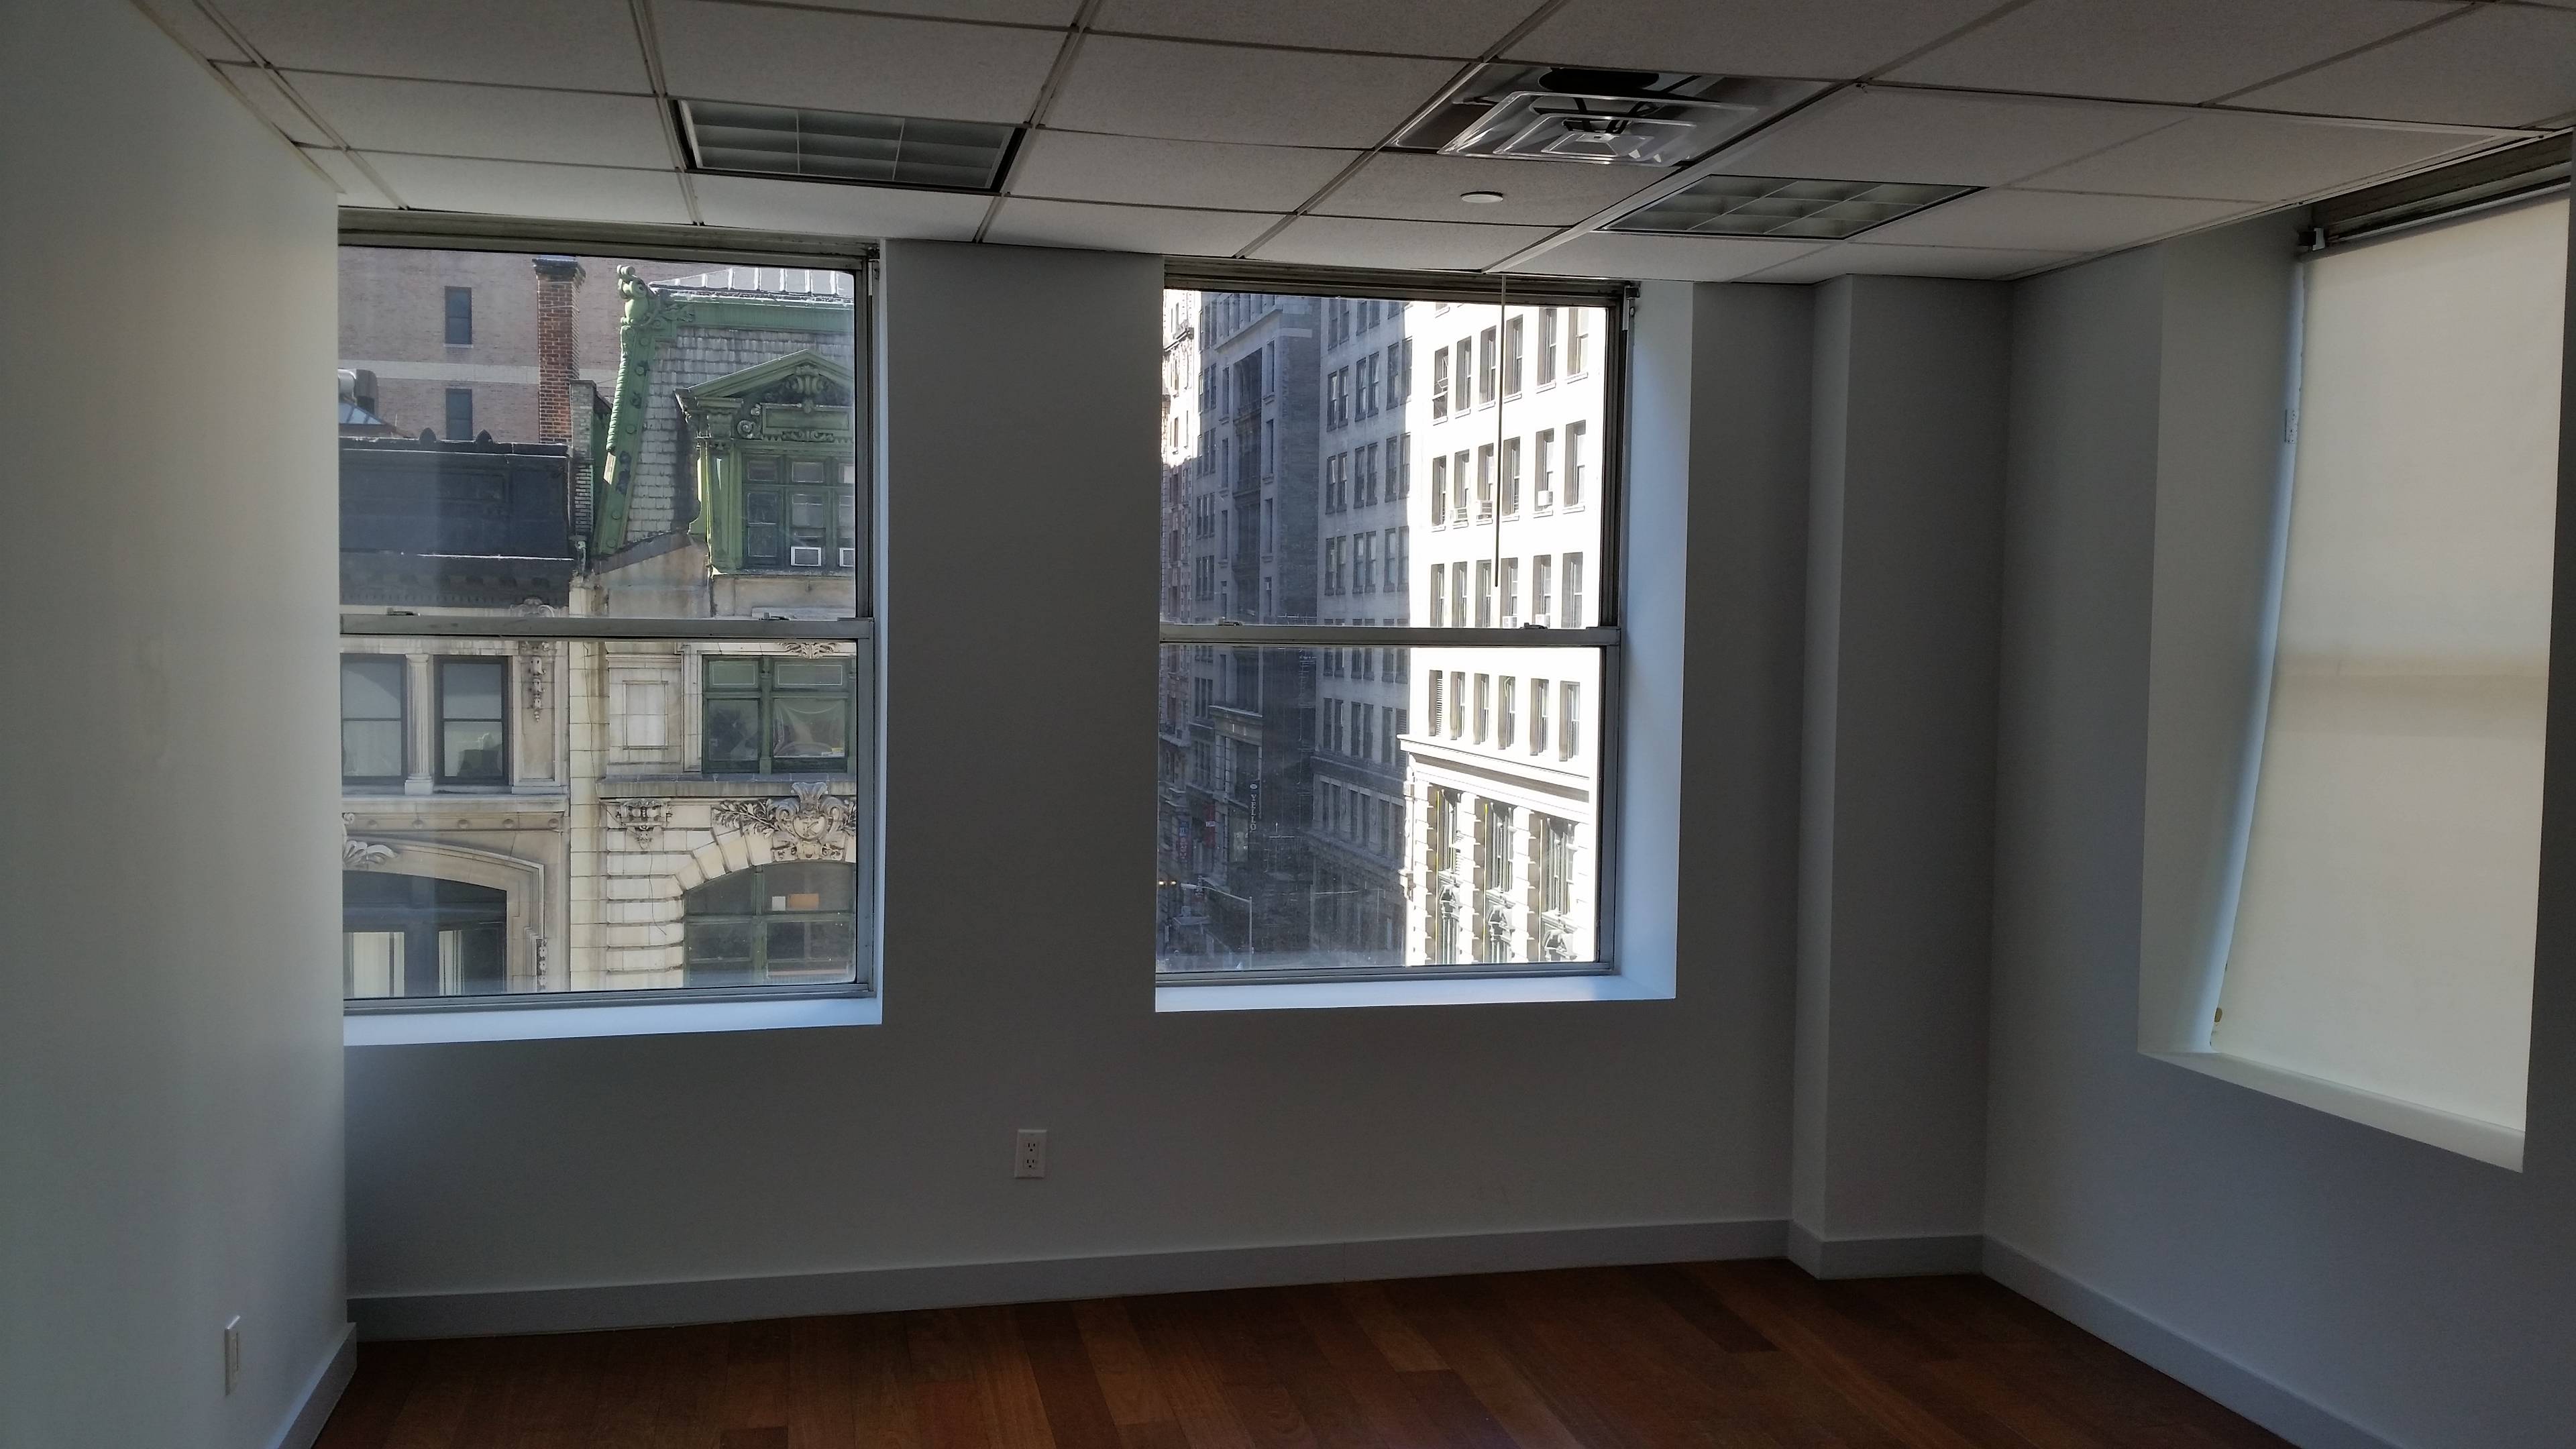 Prime Midtown East Area Office Space - Very Bright Space!